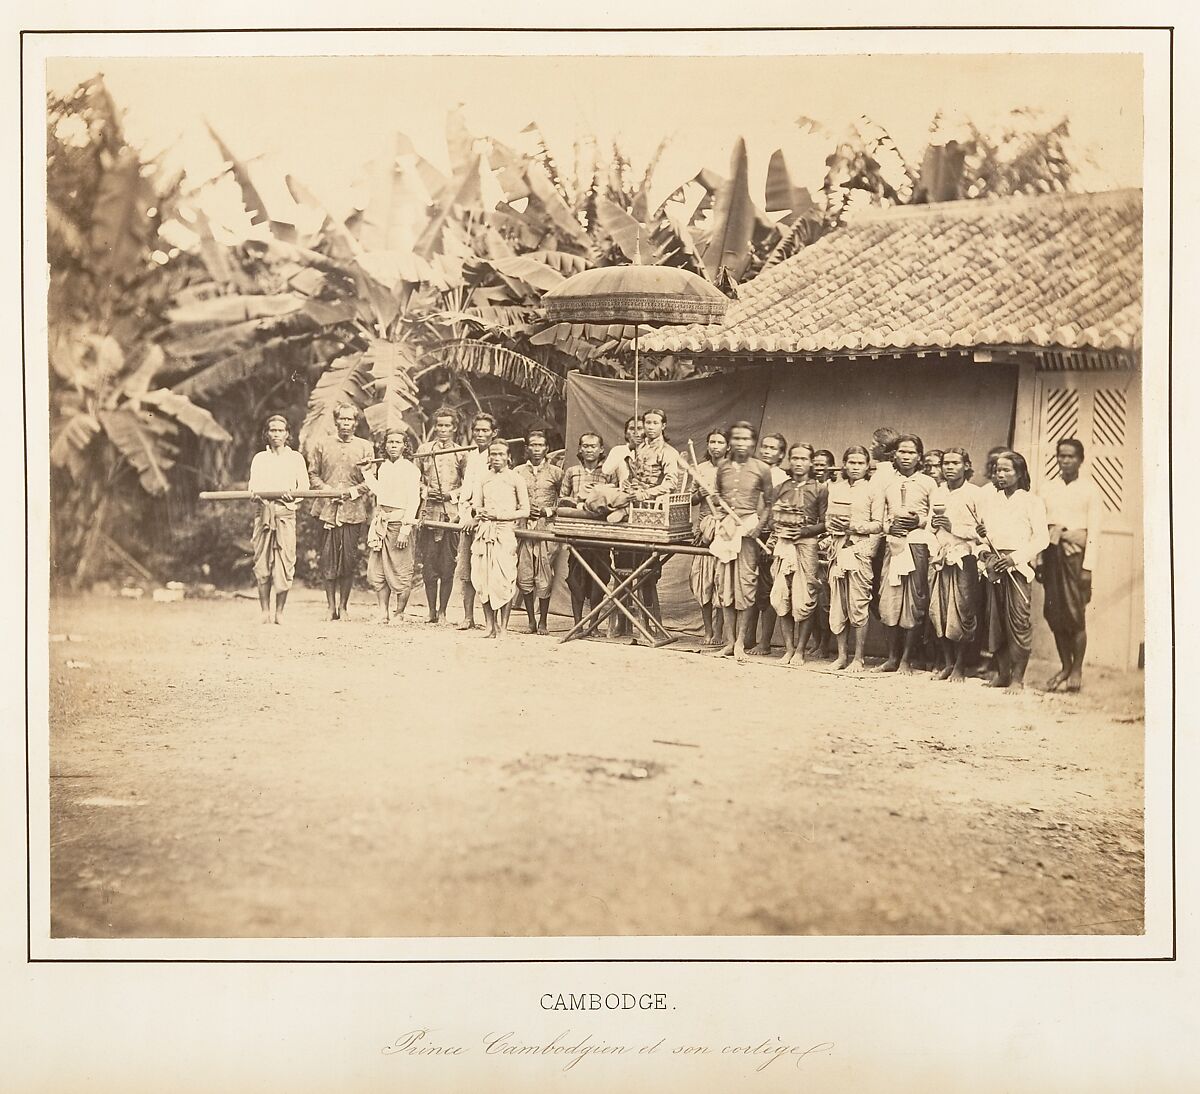 Prince Cambodgien et son Cortège, Emile Gsell (French, Sainte-Marie-aux-Mines 1838–1879 Vietnam), Albumen silver prints from glass negatives 